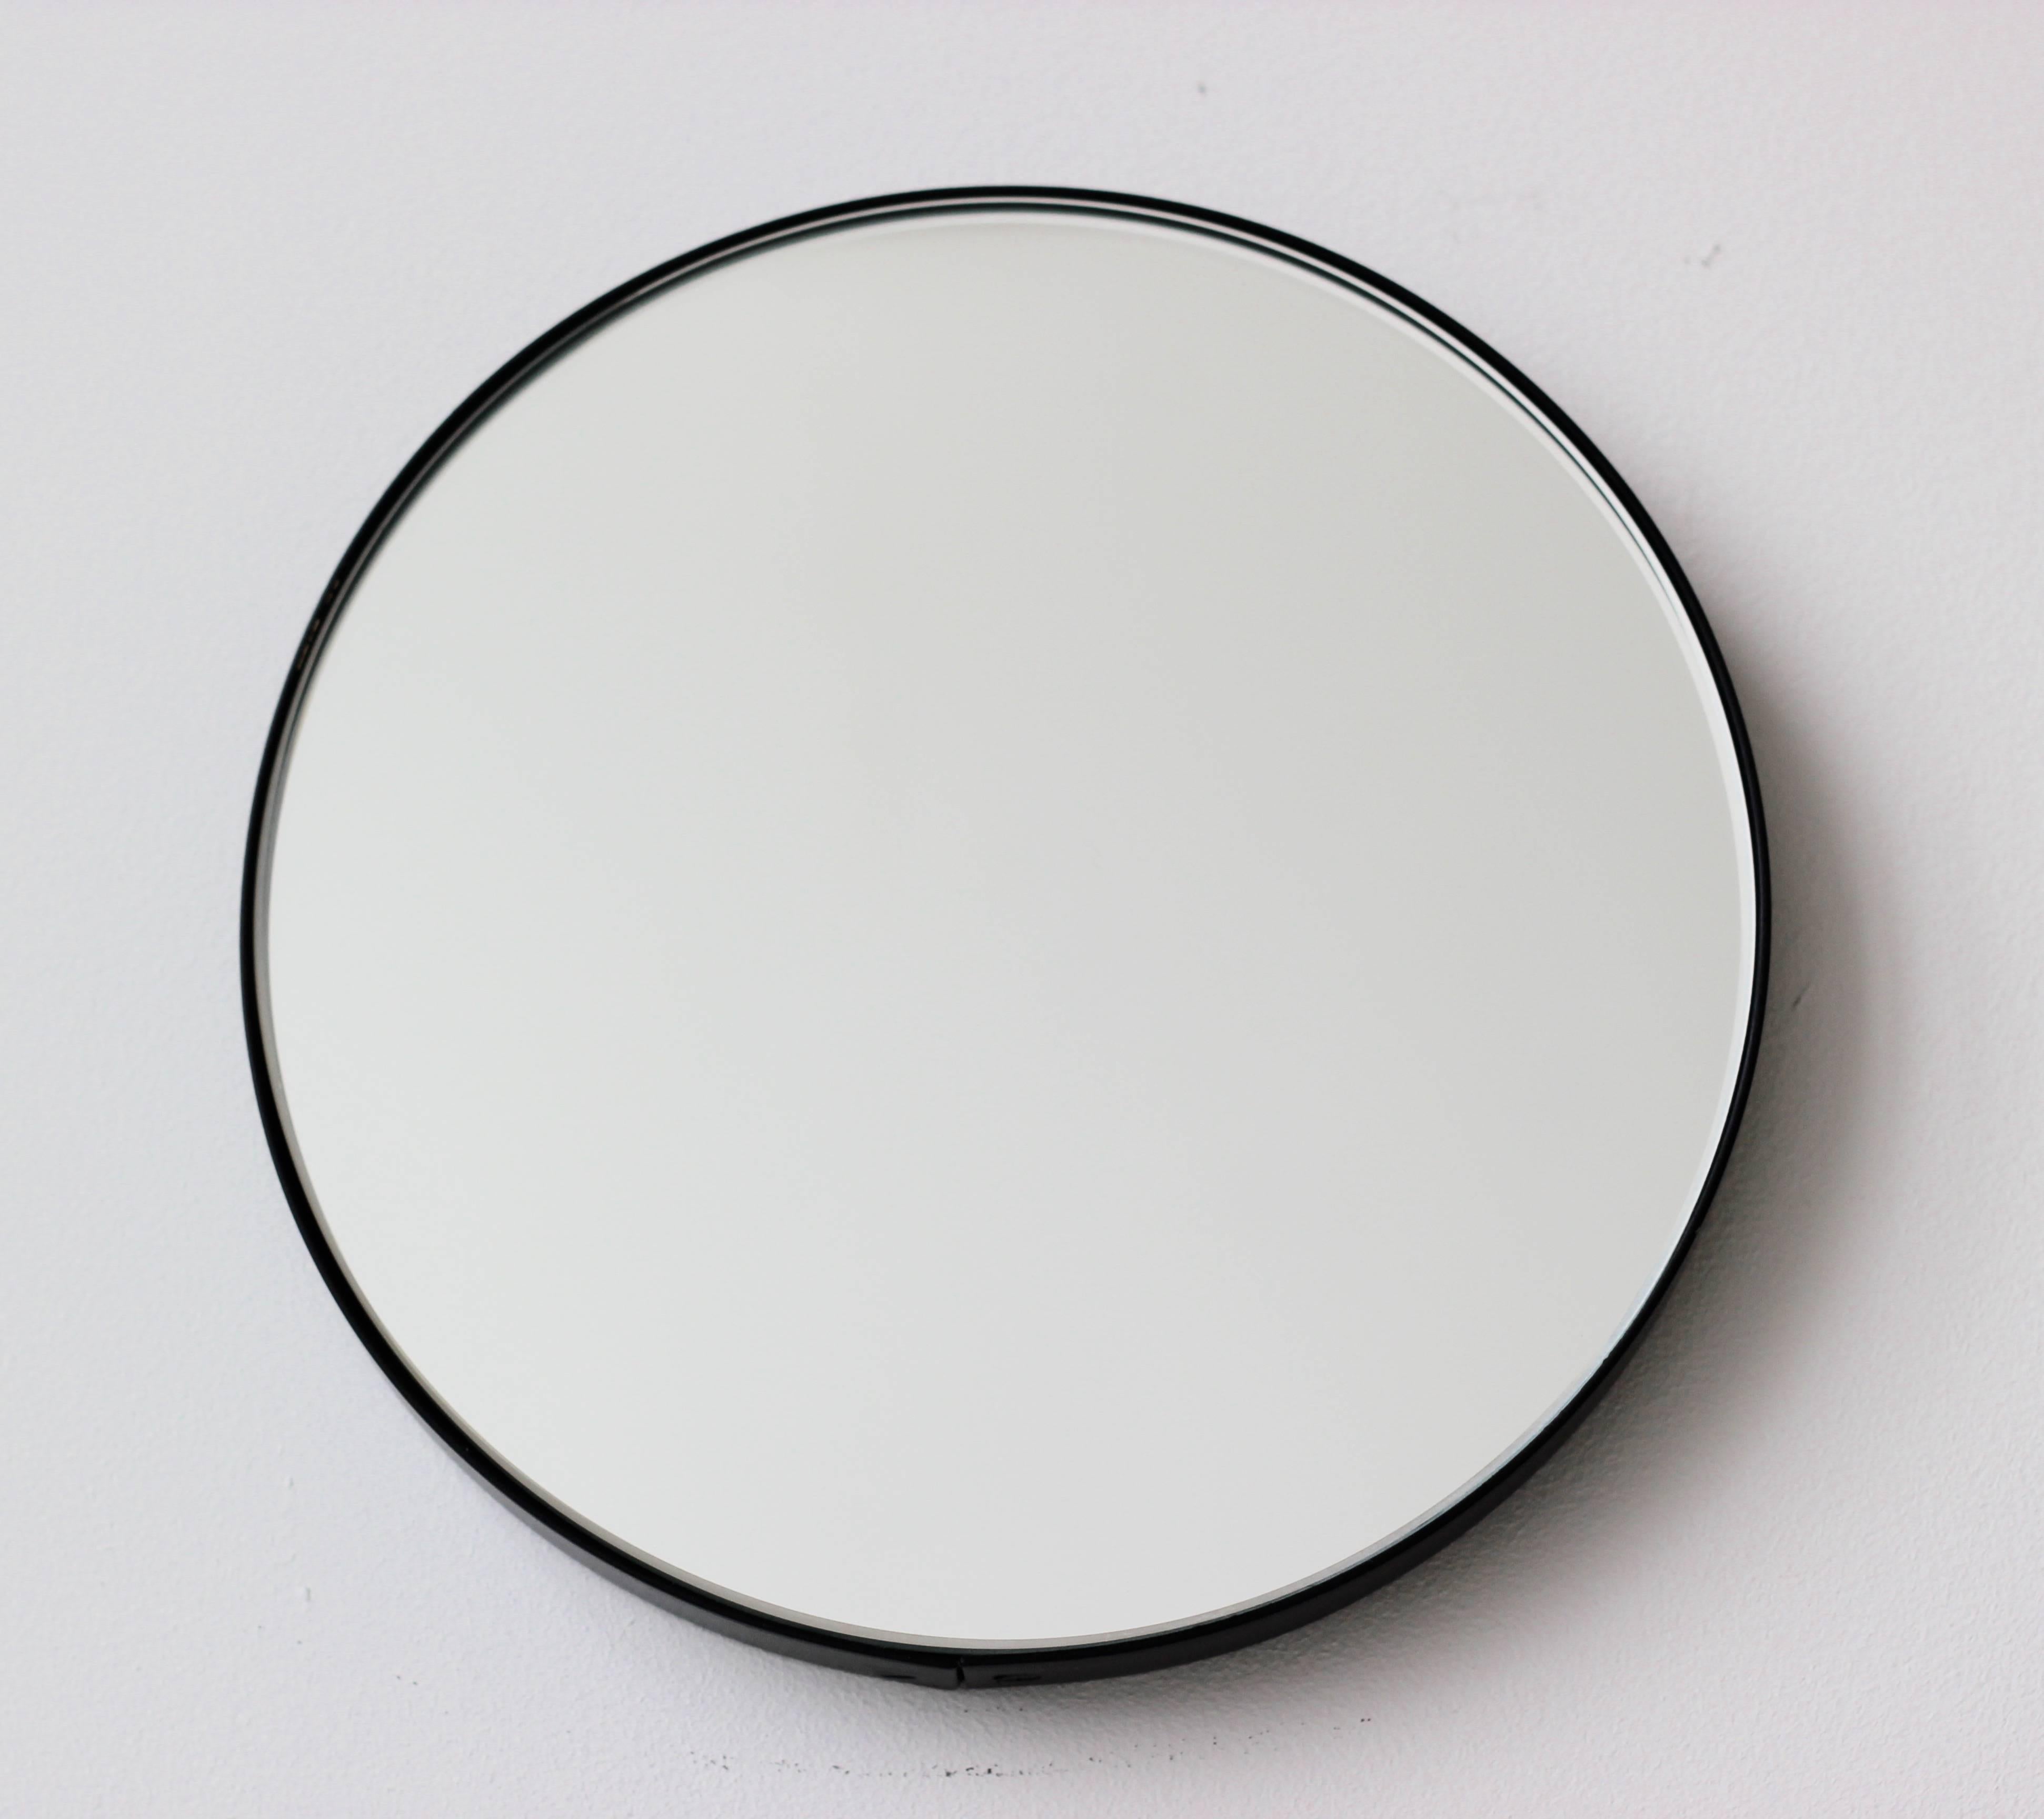 Minimalist round mirror with an elegant black powder coated aluminium frame. Designed and handcrafted in London, UK.

Medium, large and extra-large mirrors (60, 80 and 100cm) are fitted with an ingenious French cleat (split batten) system so they